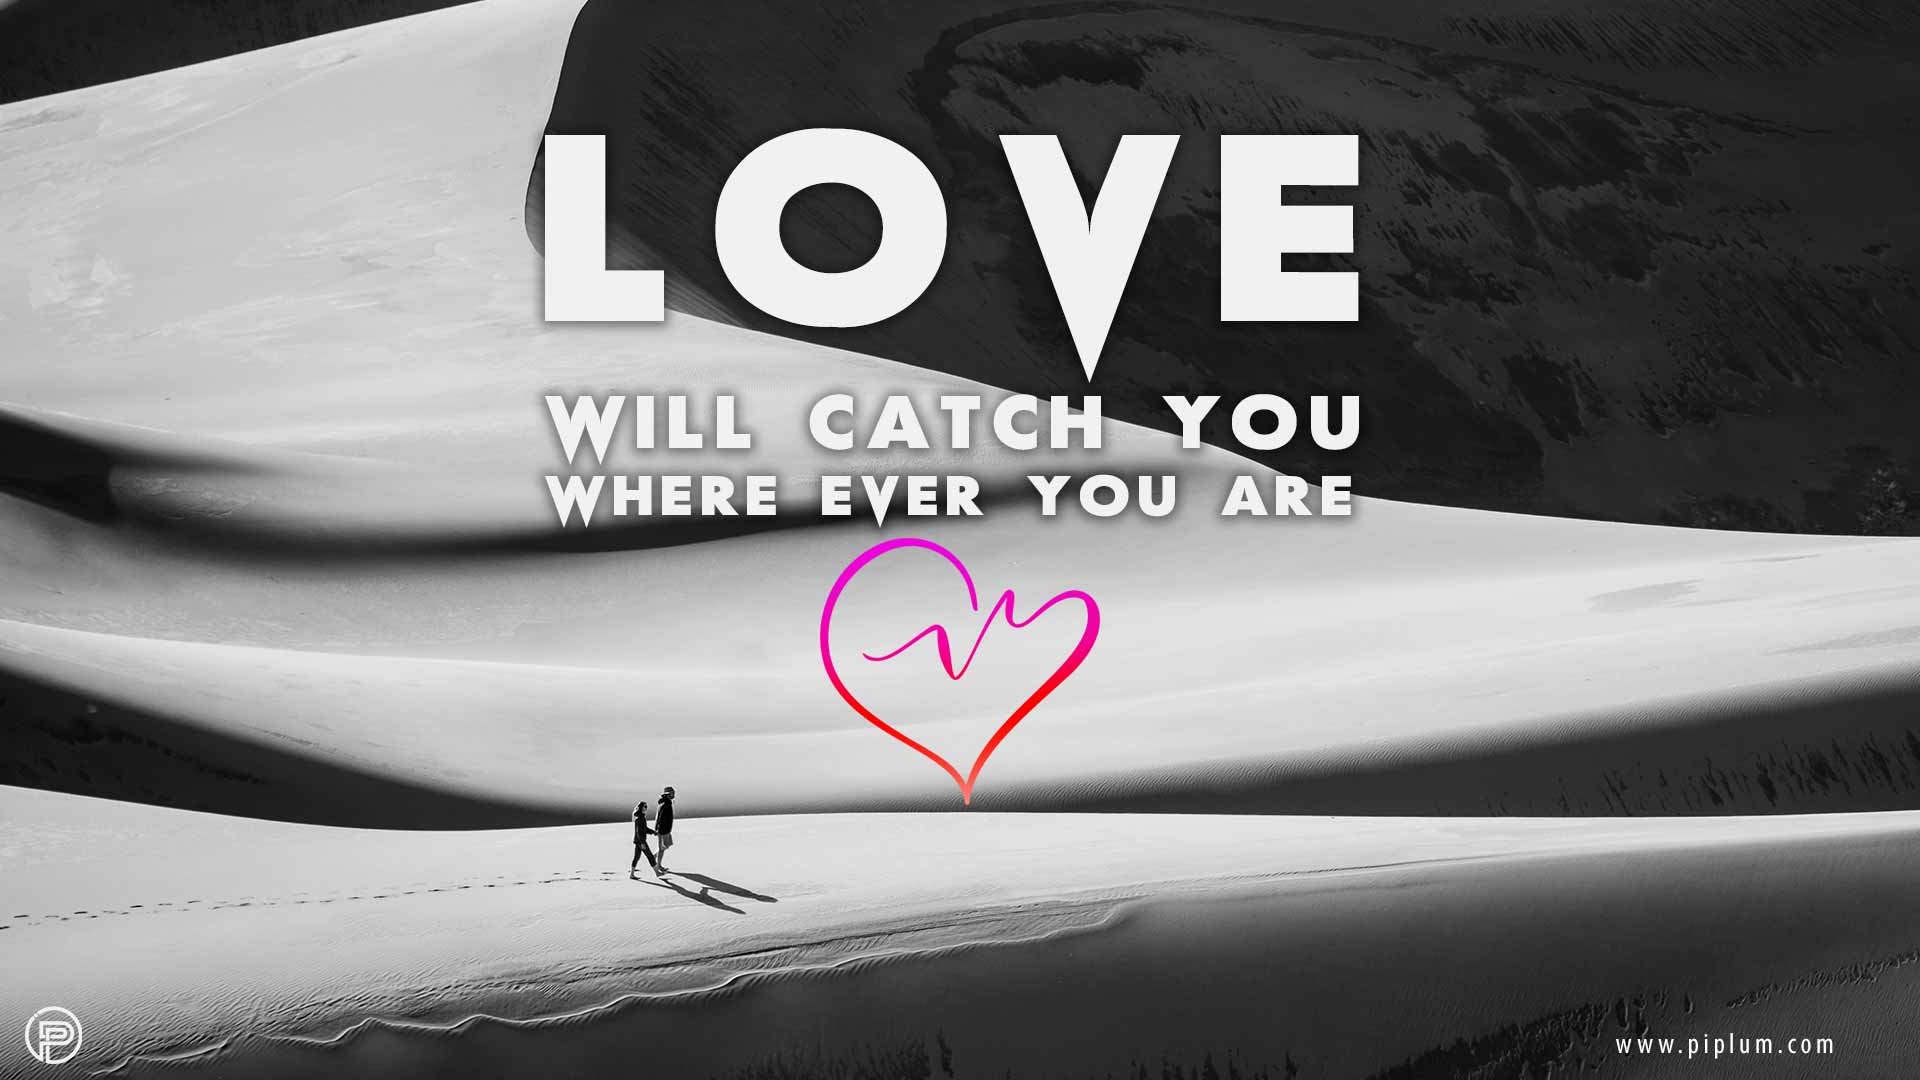 Love-will-catch-you-where-ever-you-are-inspirational-quote-desert-couple